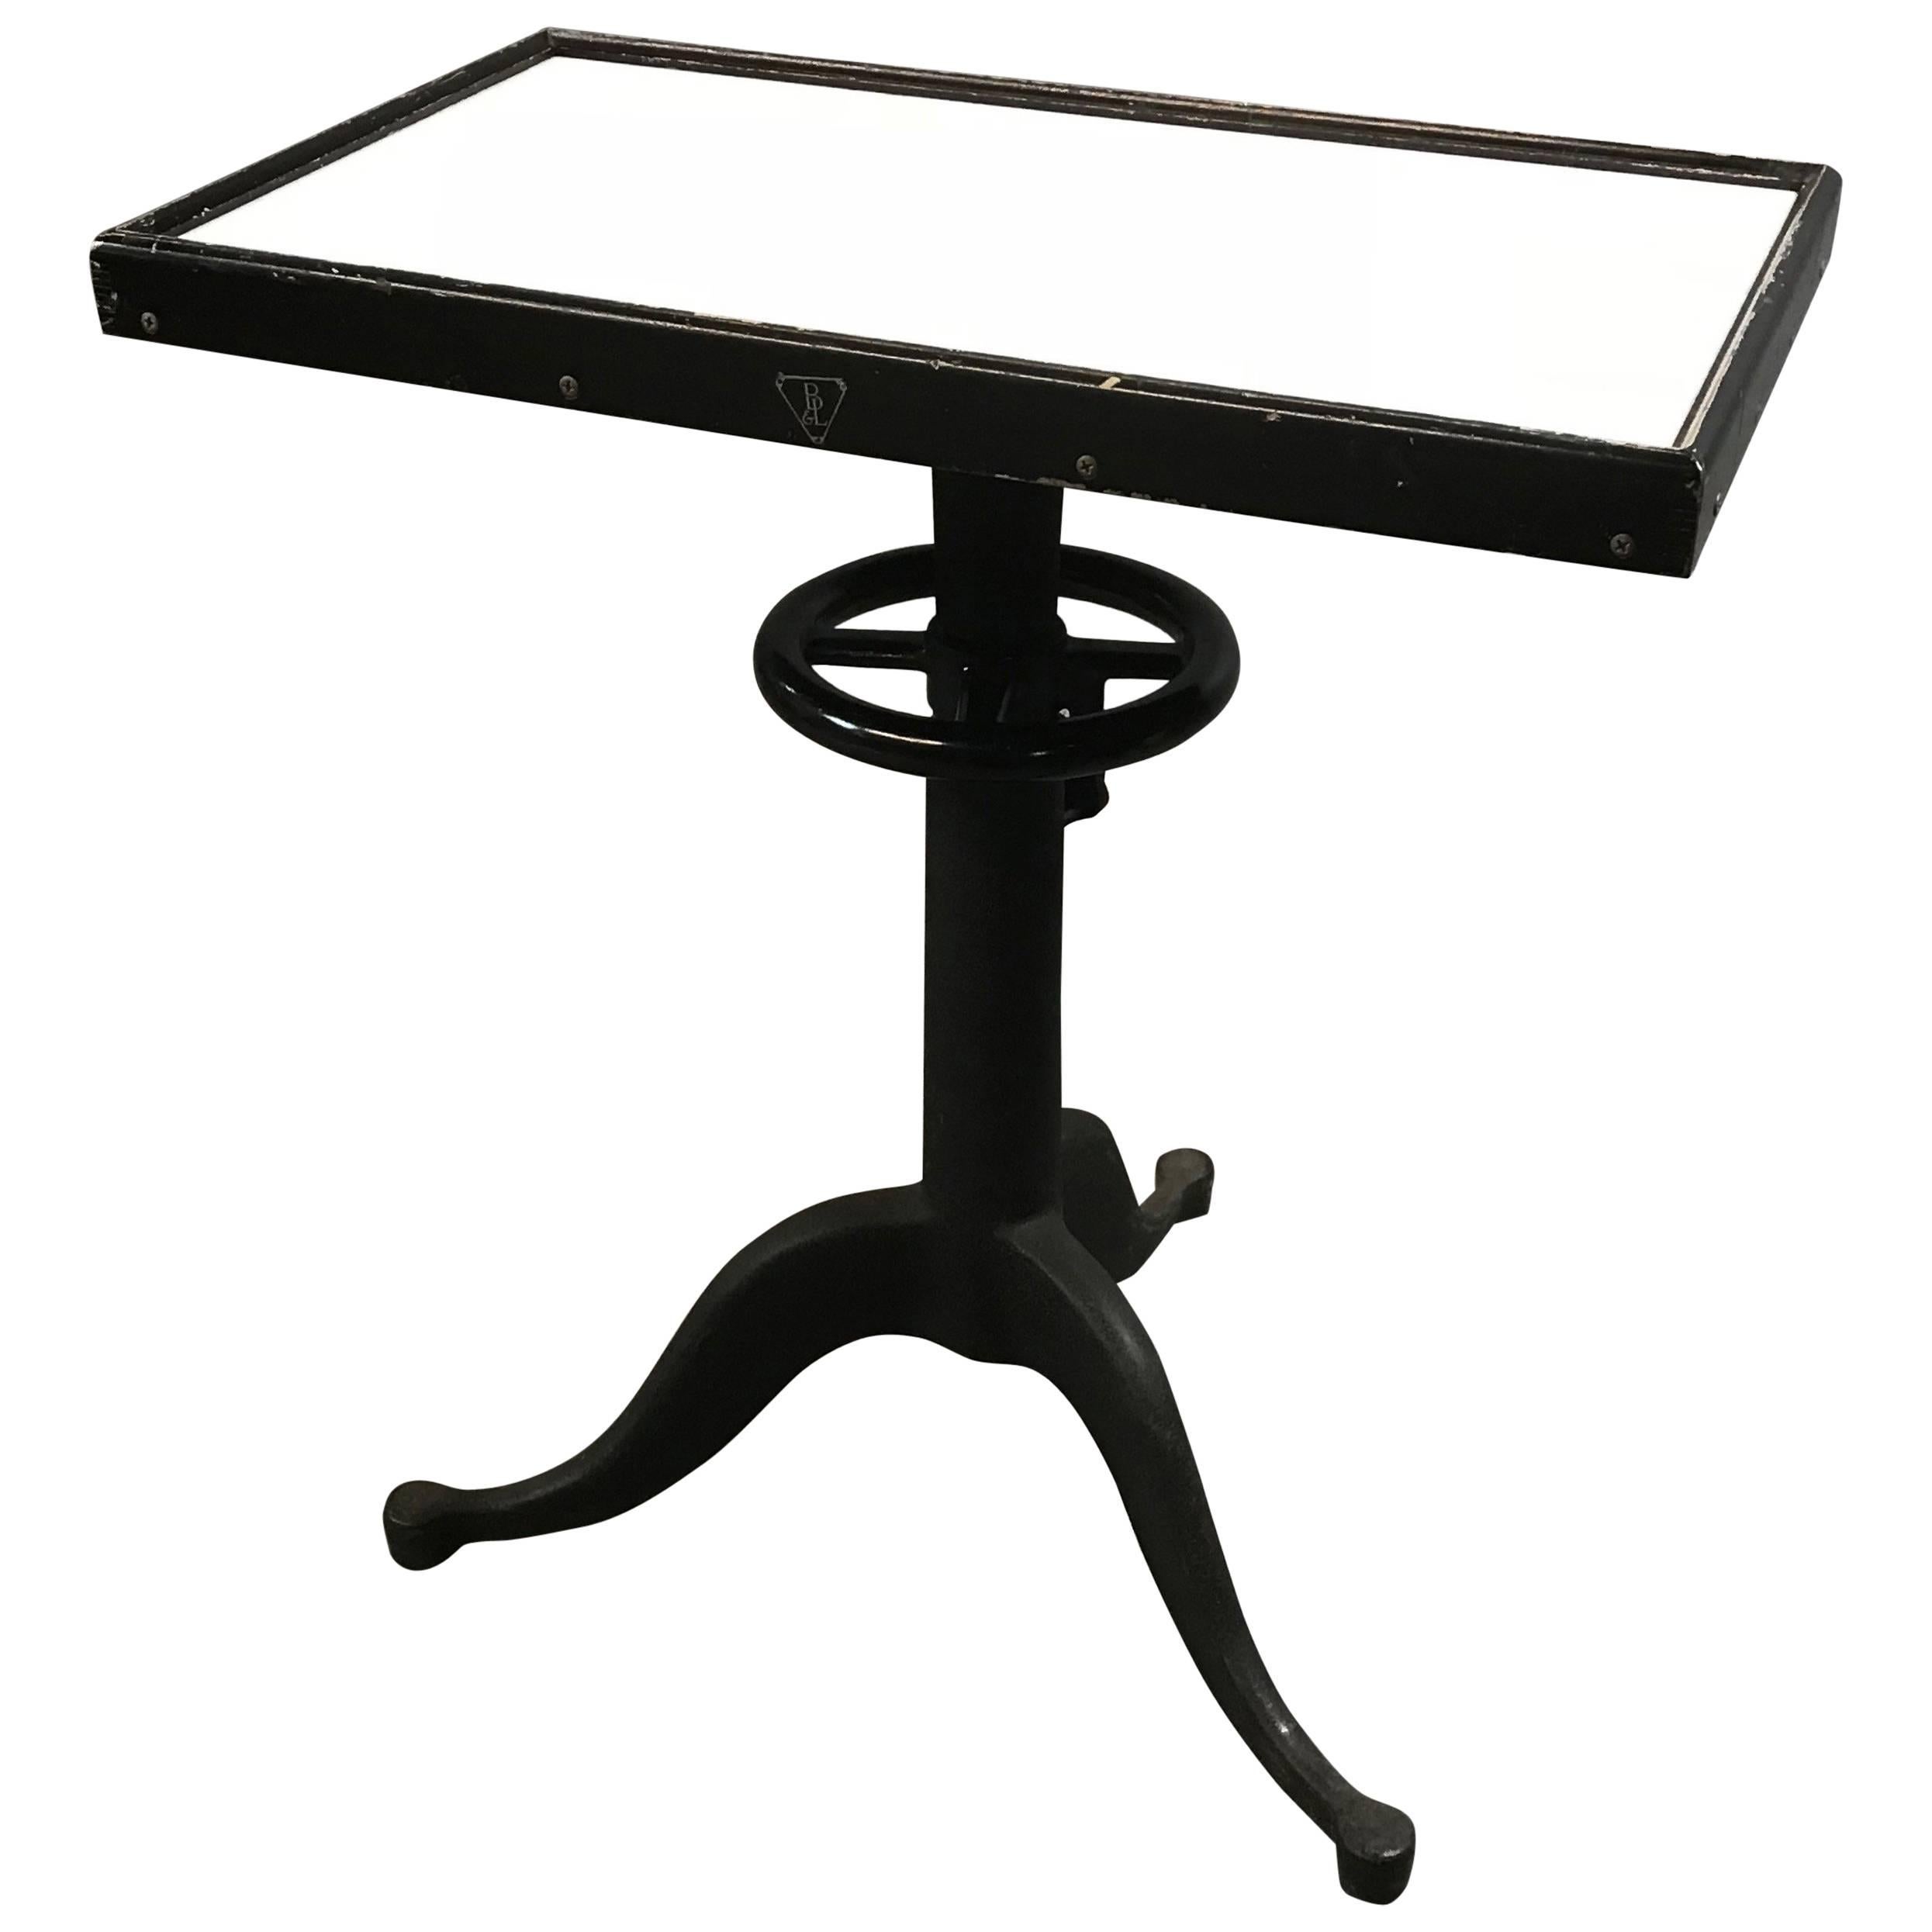 Industrial Bausch & Lomb Milk Glass Optometry Examination Side Table